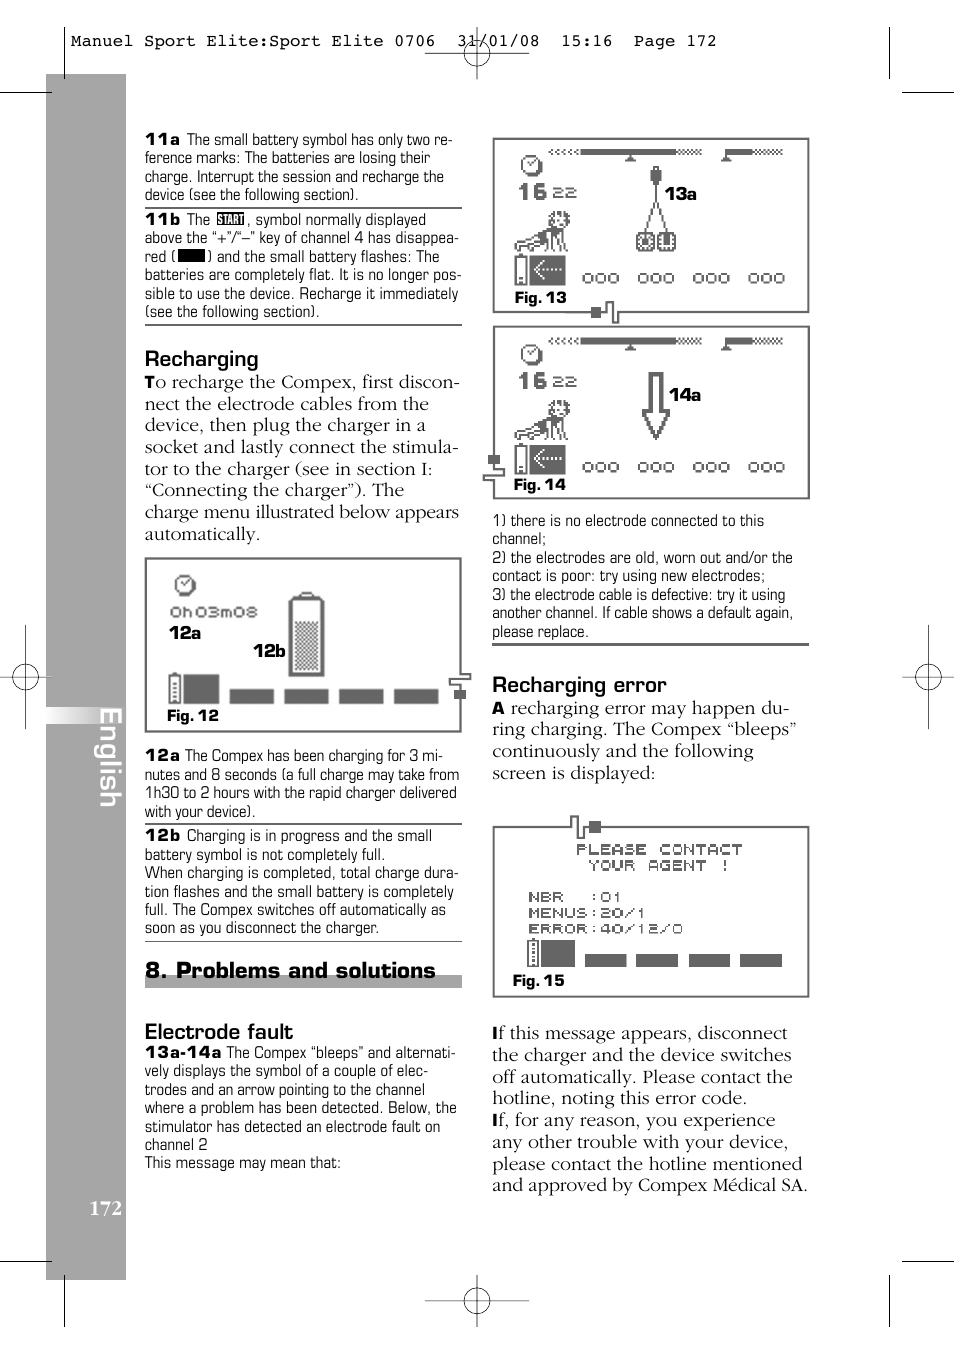 English, Problems and solutions | Compex Sport Elite User Manual | Page 172  / 320